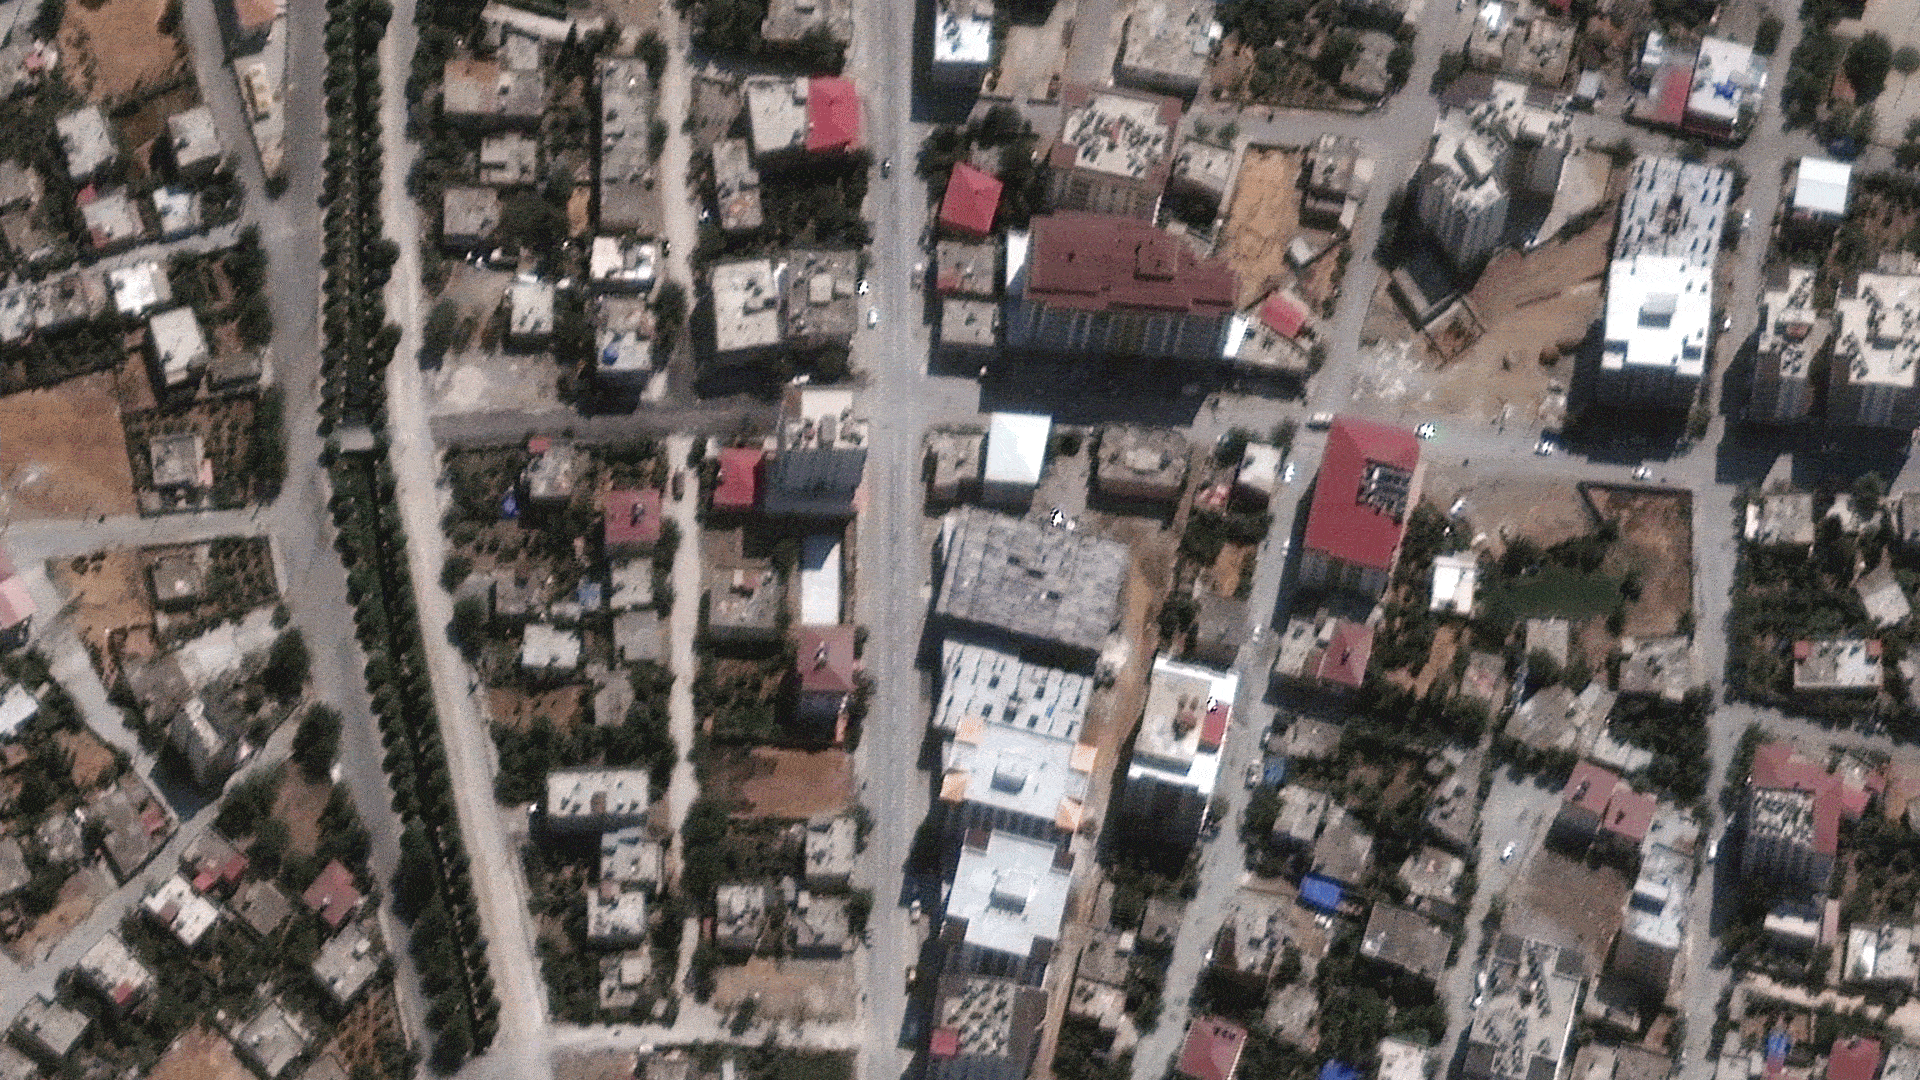 Buildings in Nurdagi, Turkey before and after the earthquake